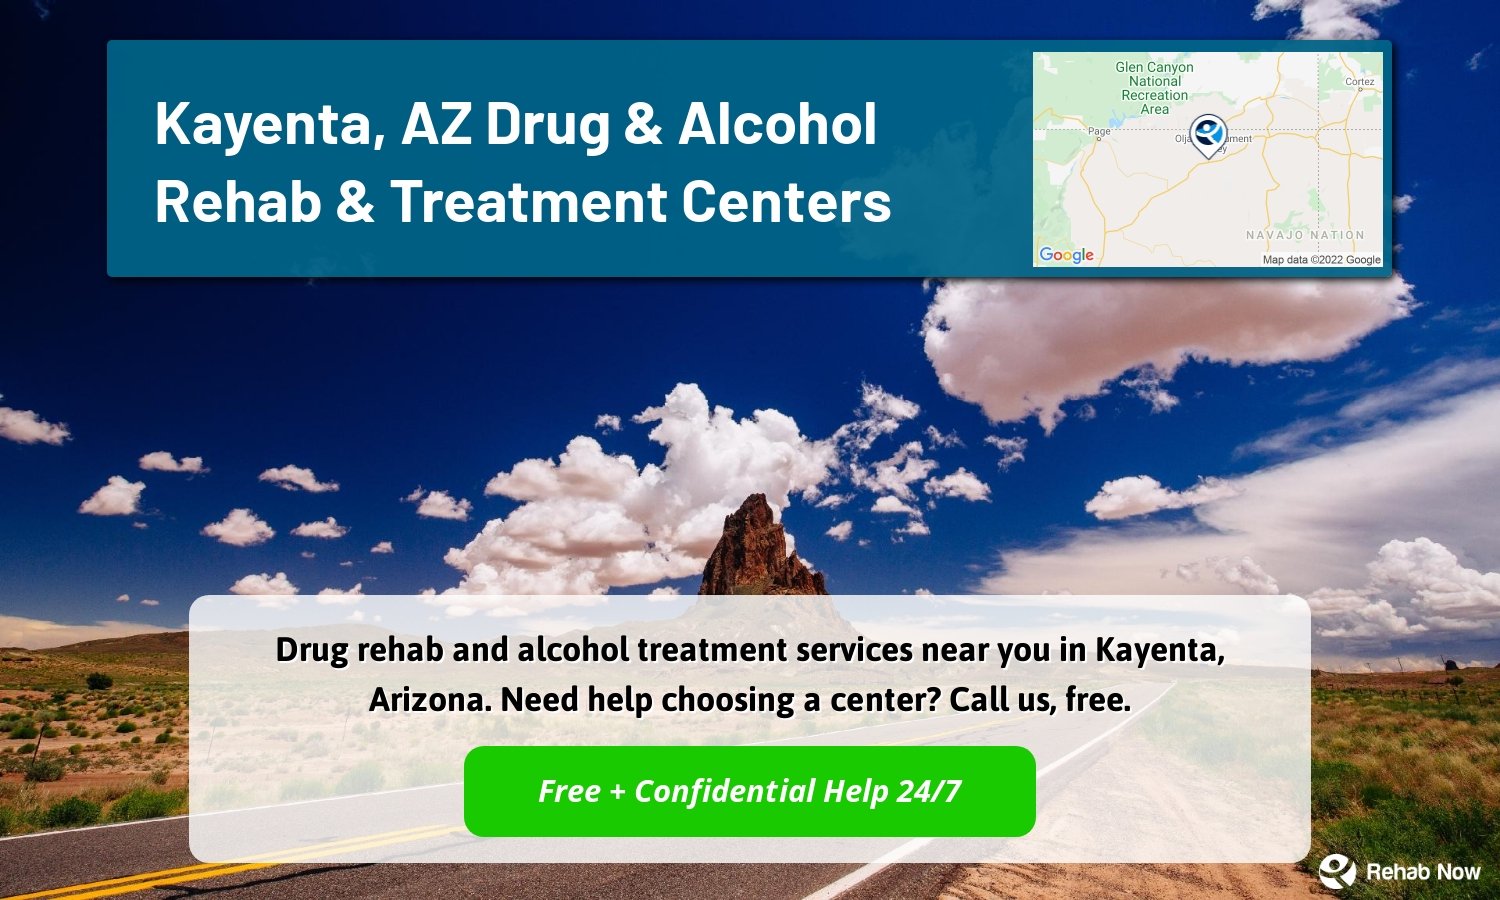 Drug rehab and alcohol treatment services near you in Kayenta, Arizona. Need help choosing a center? Call us, free.